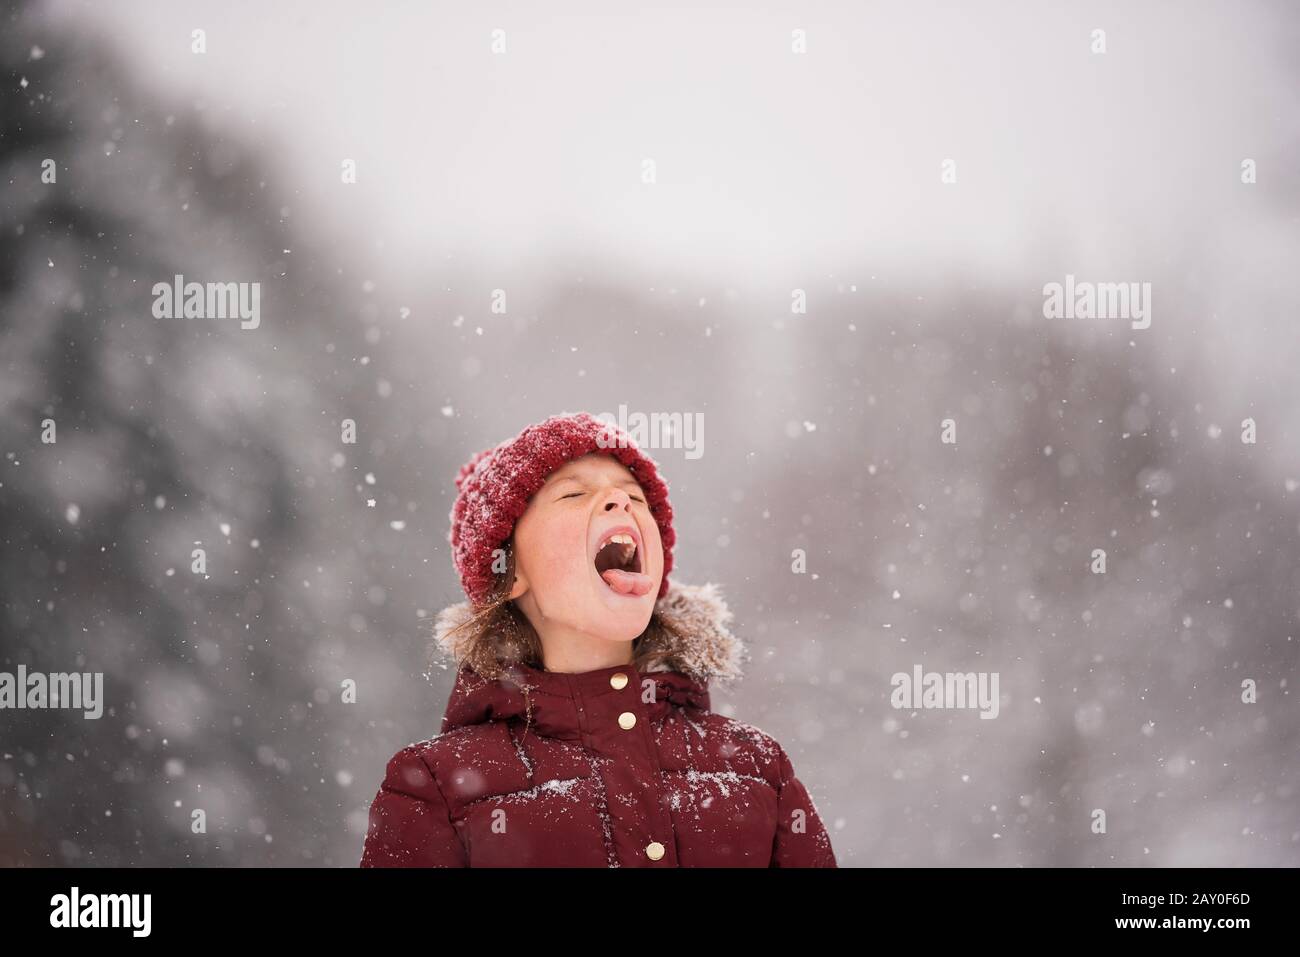 Girl standing outdoors catching snow in her mouth, Wisconsin, USA Stock Photo